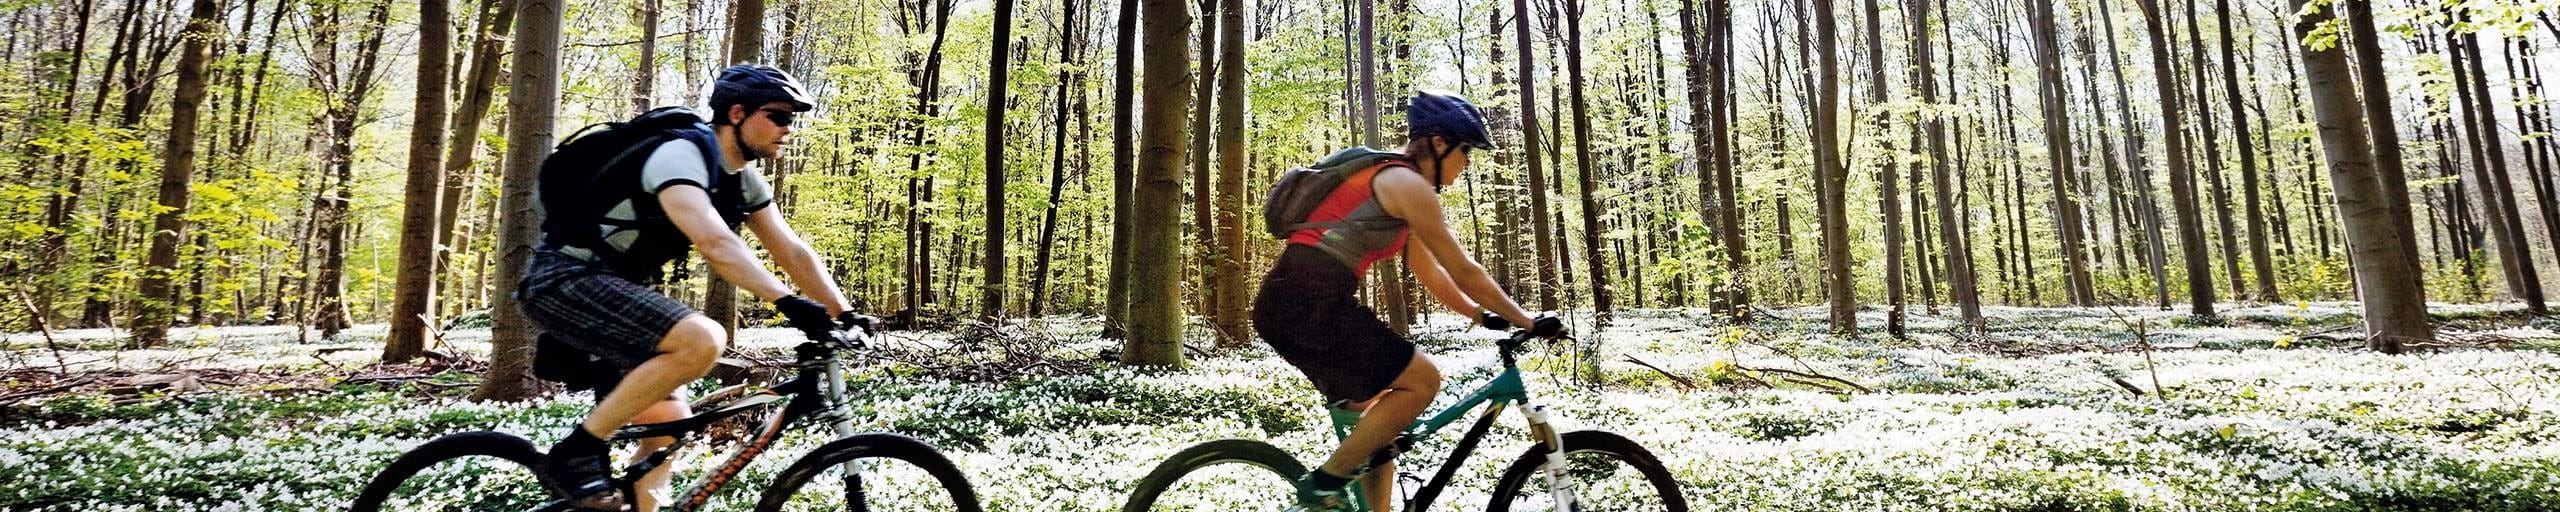 Two people riding mountain bikes in the forrest.